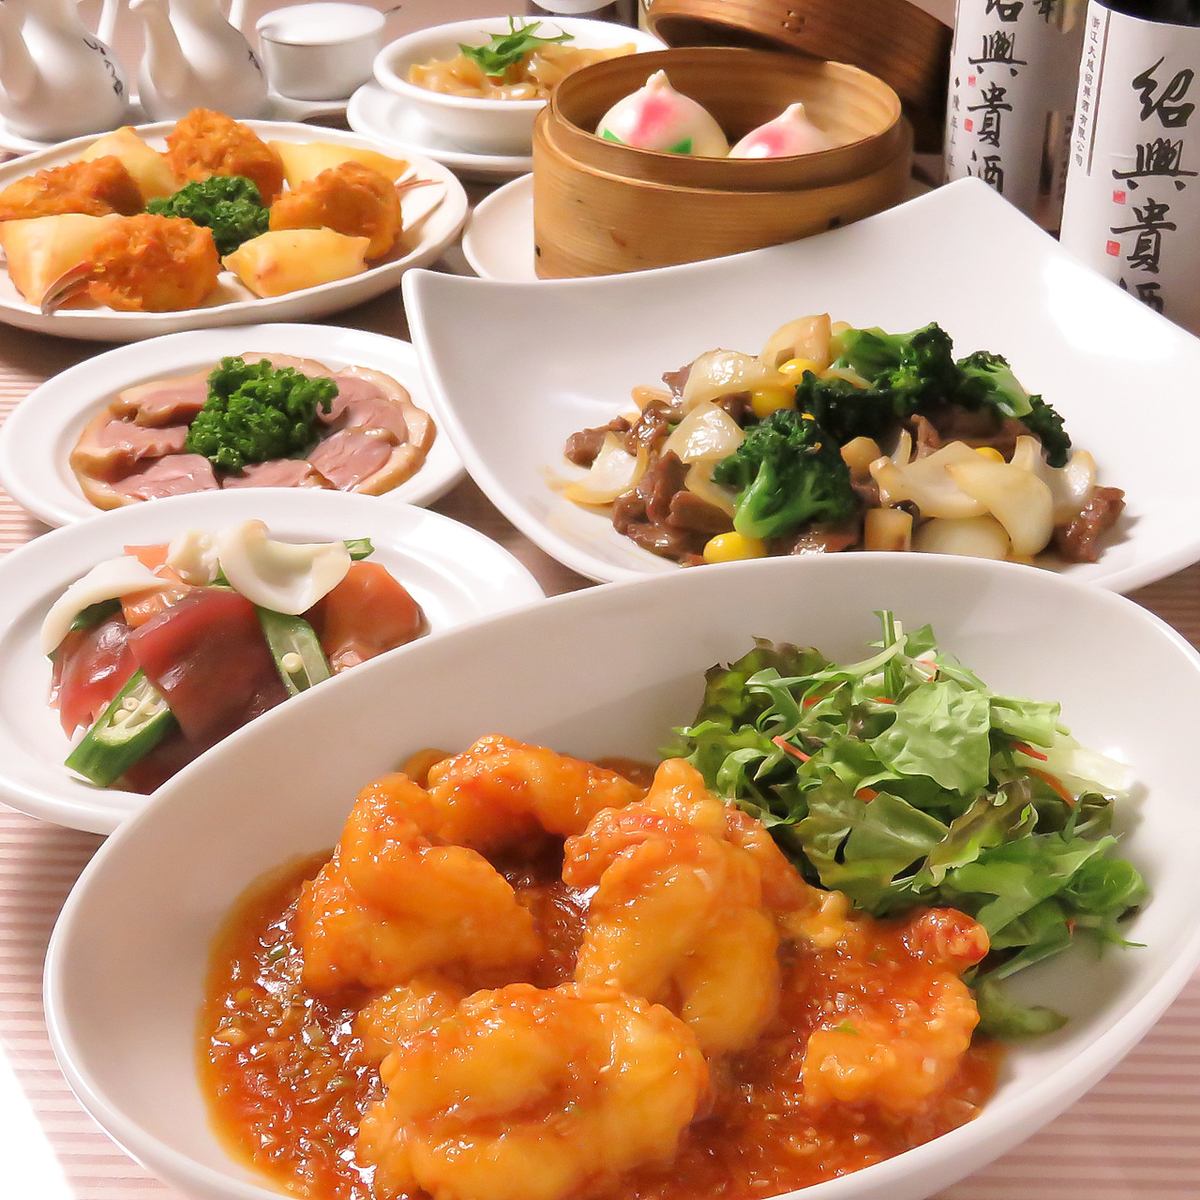 It is a course that is very satisfying with reasonable and volume Chinese food!